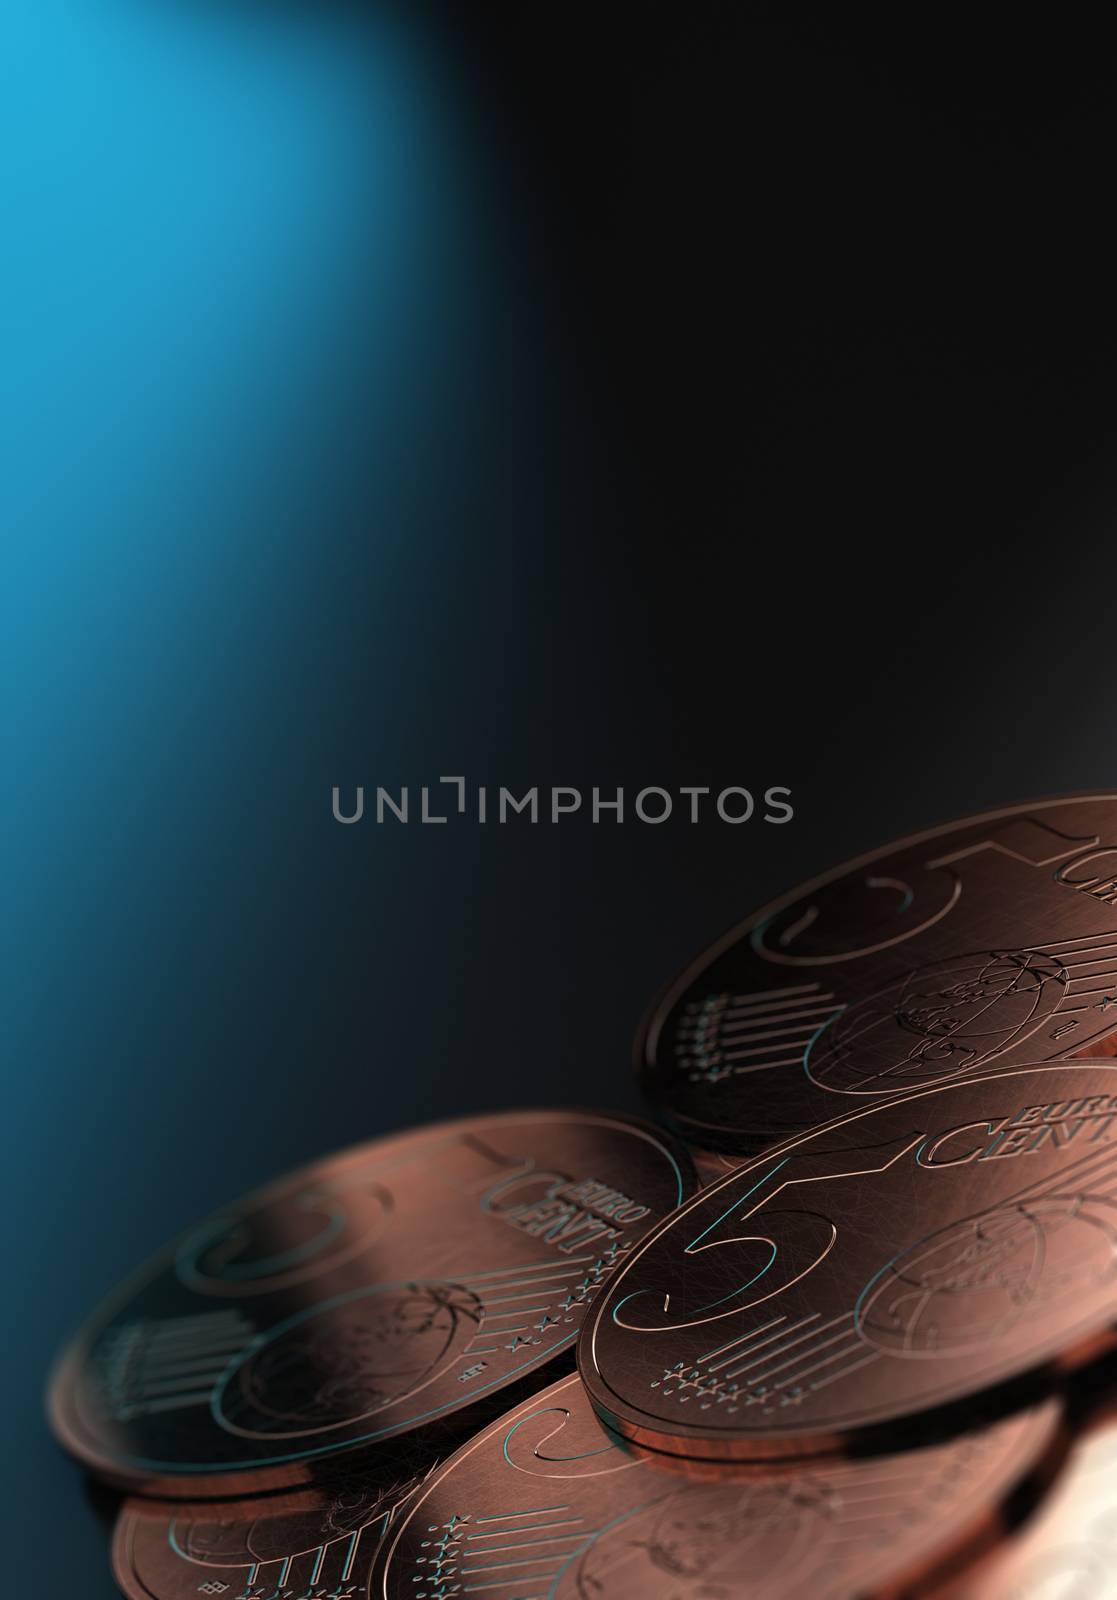 Euros currency, close up 5 cents coins over blue background with blur effect